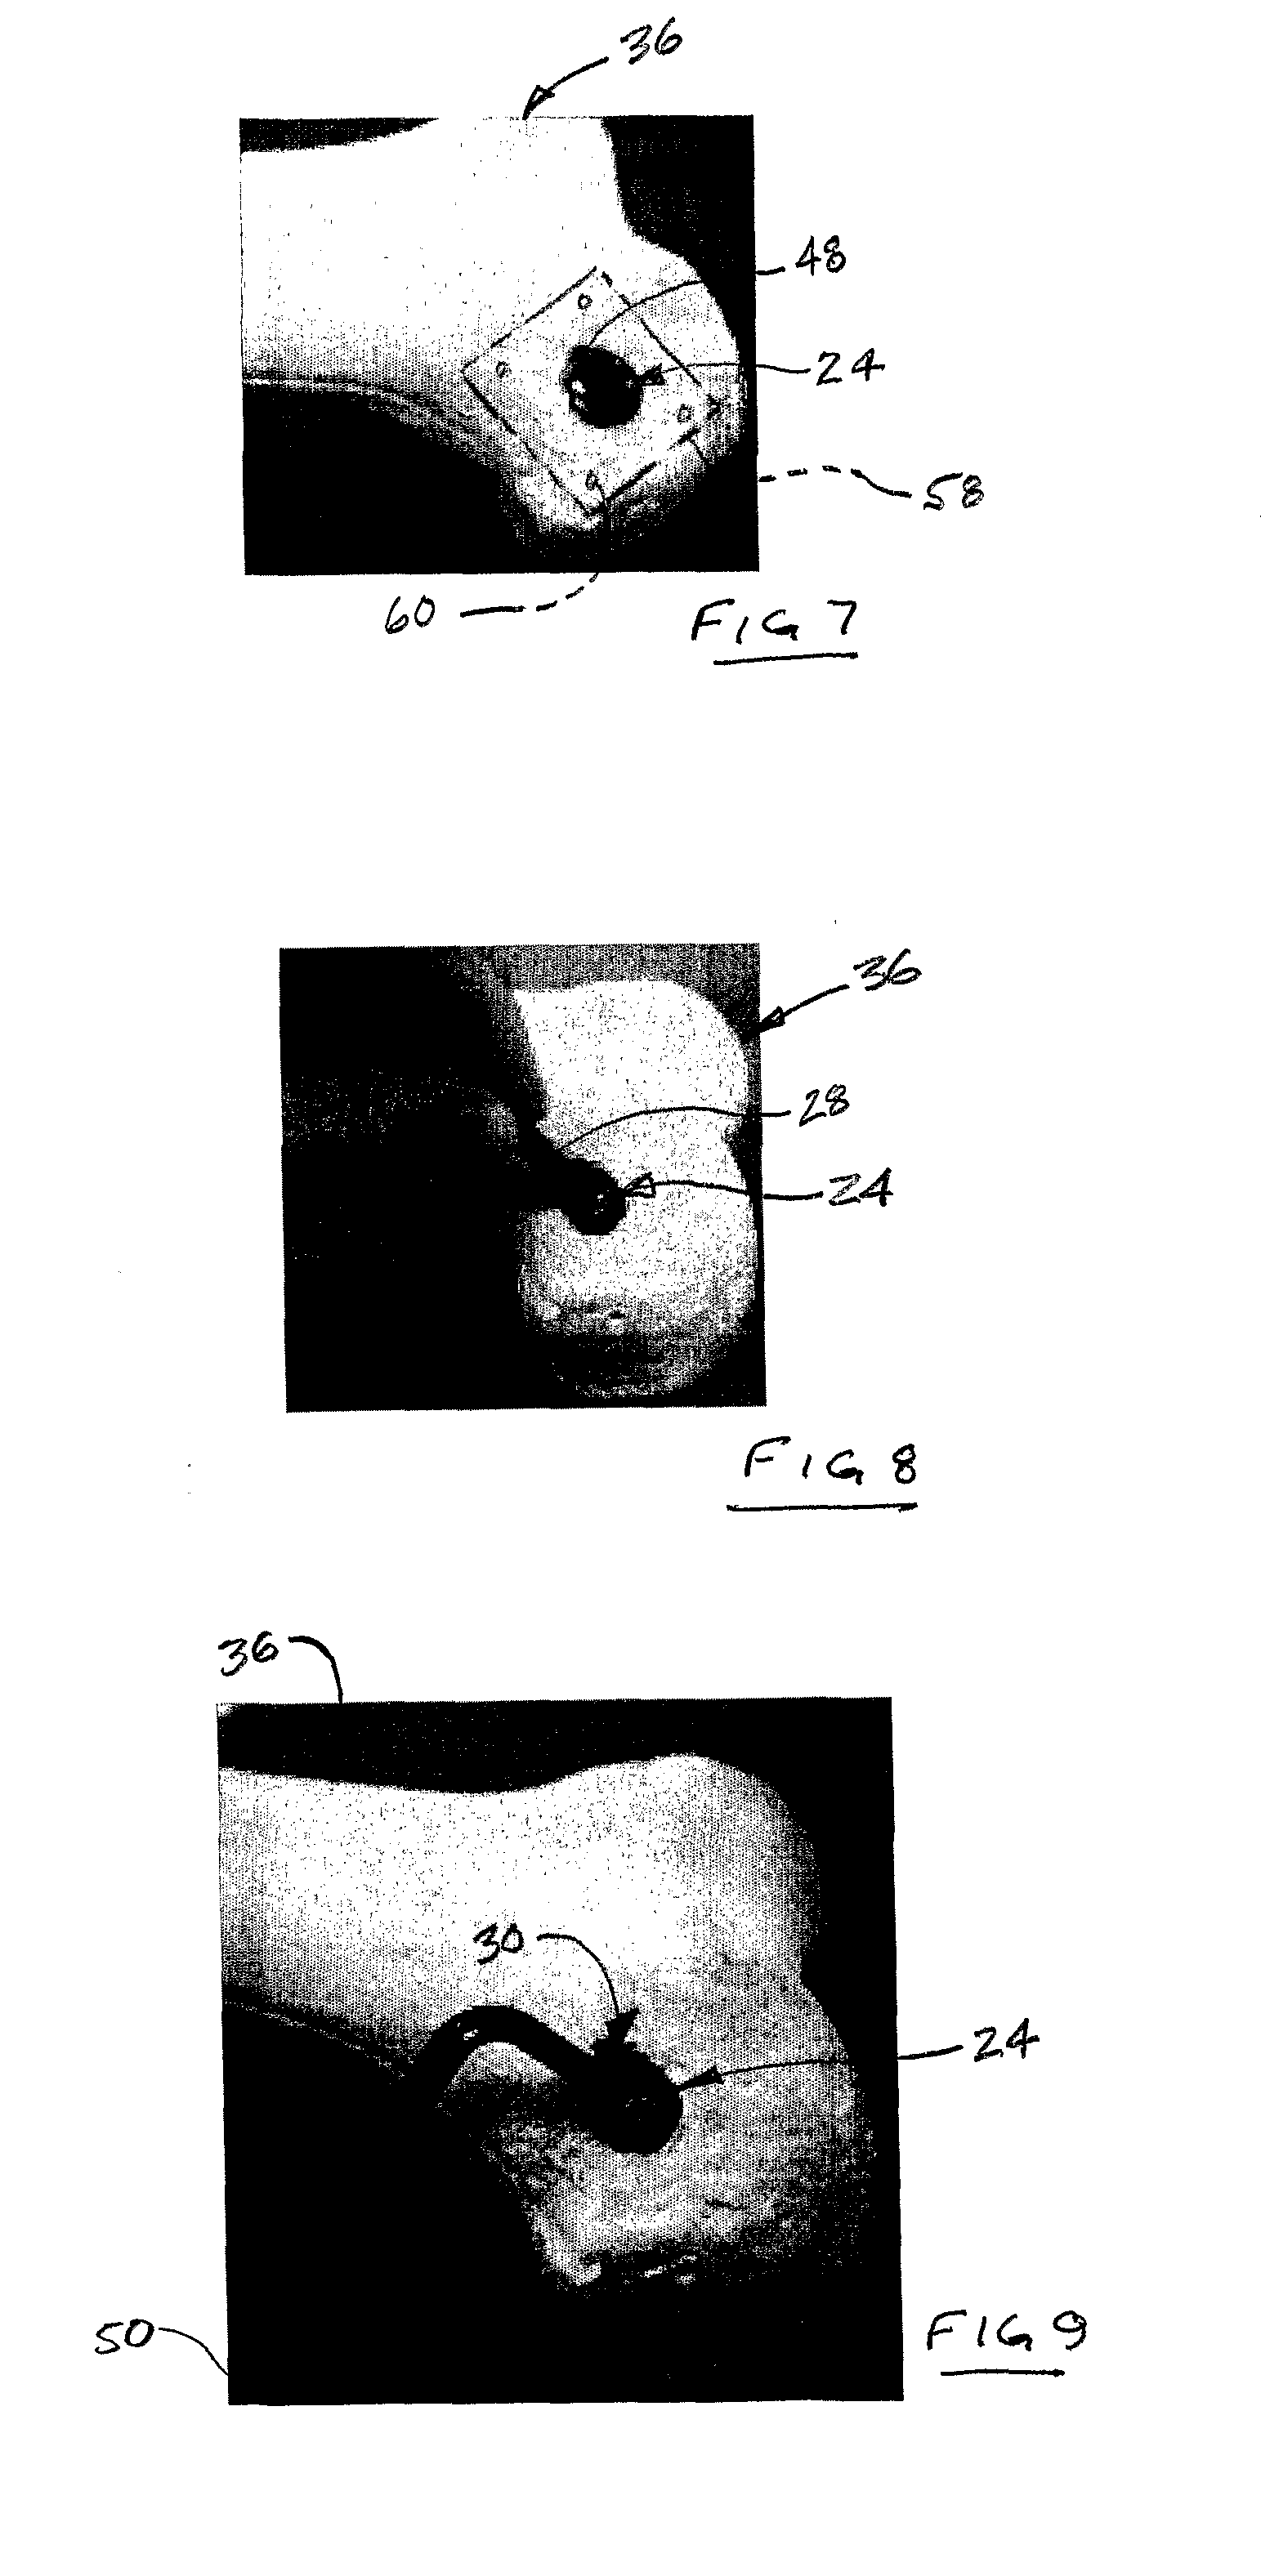 System and Method for Joint Restoration by Extracapsular Means